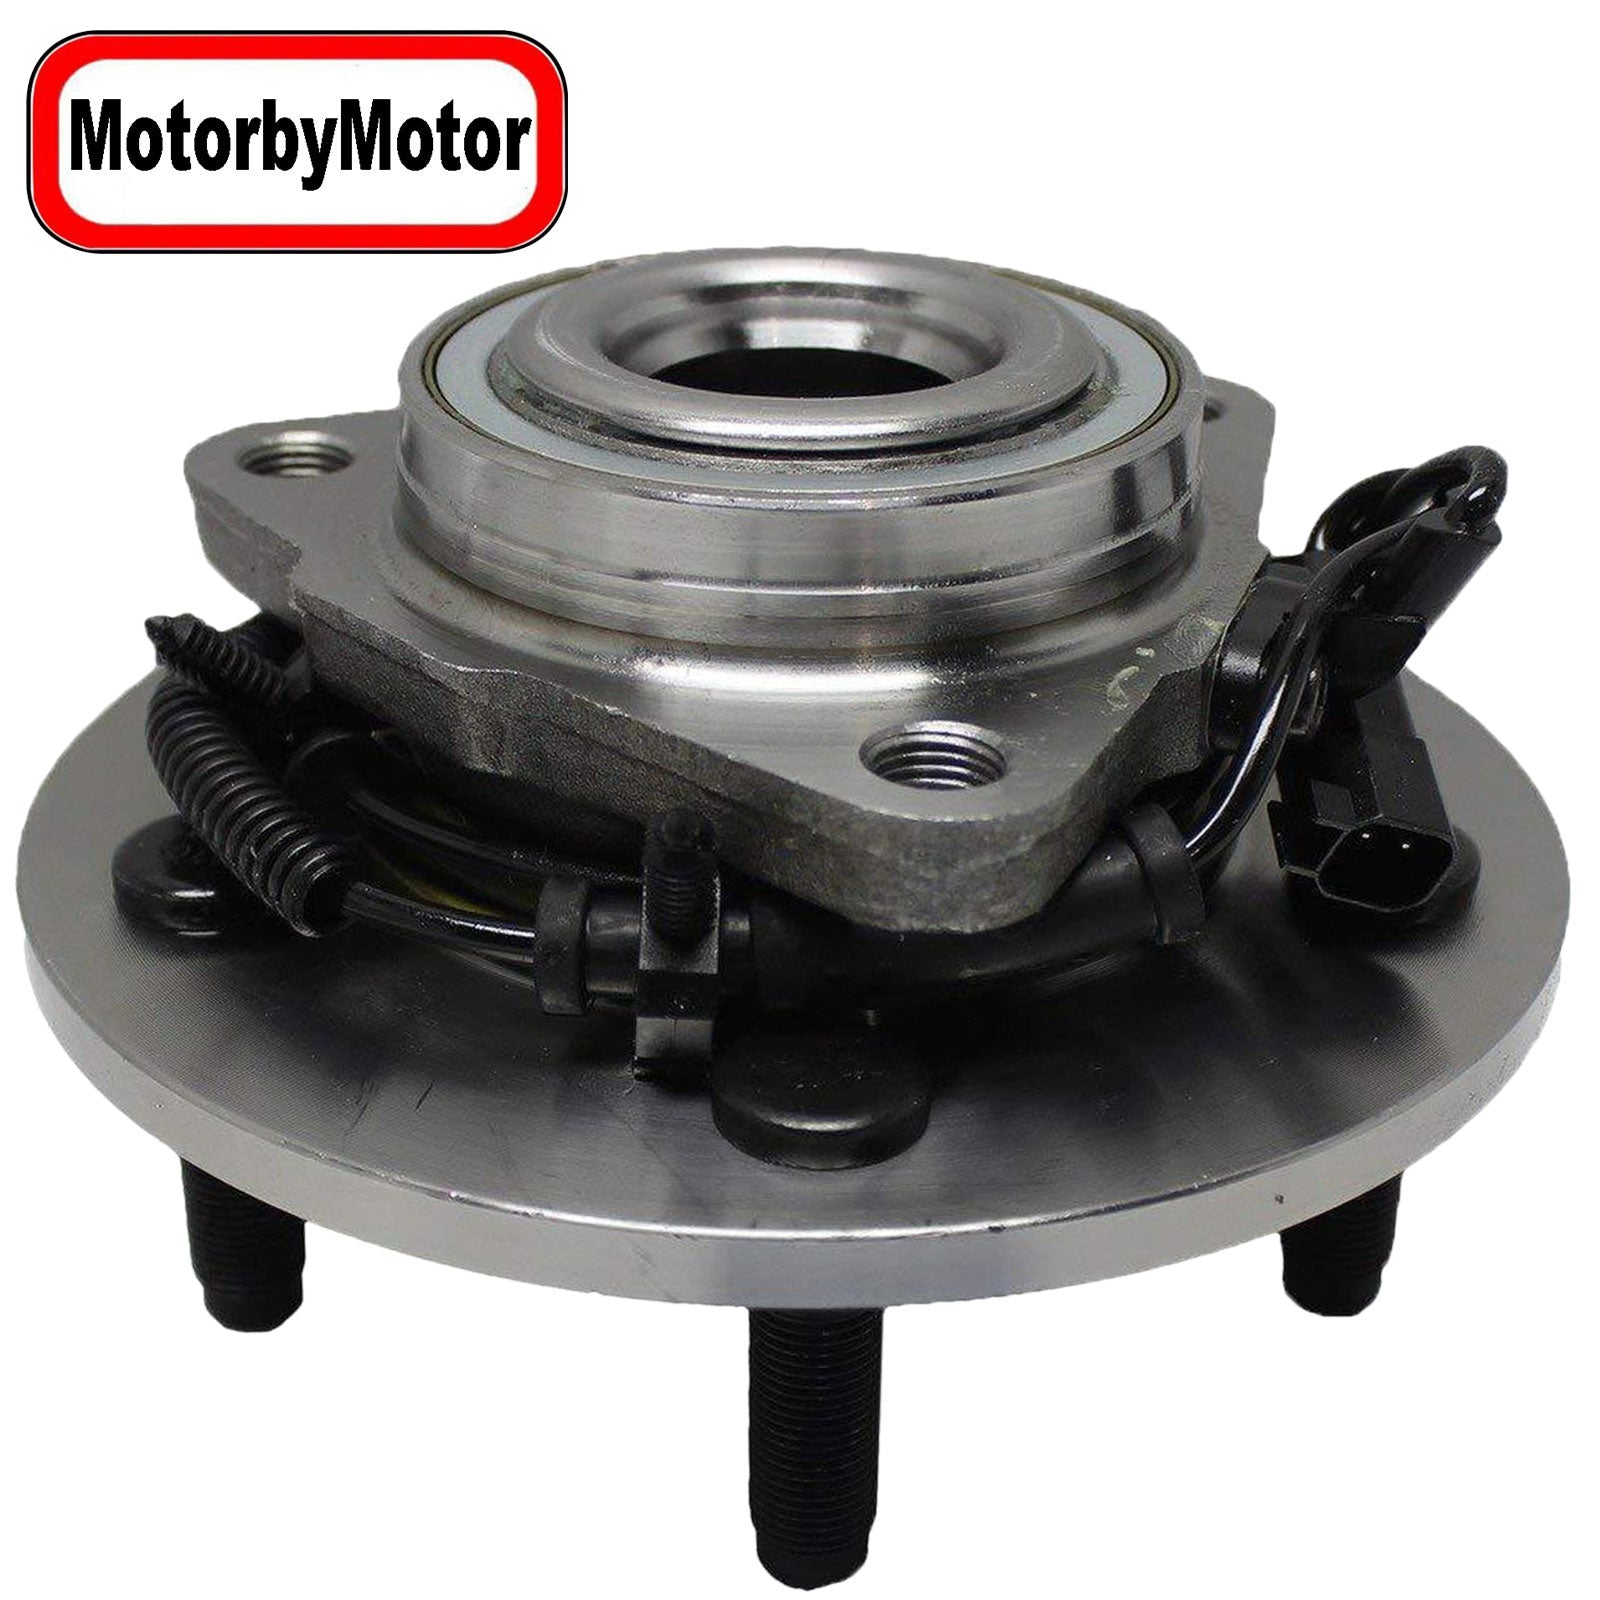 MotorbyMotor 515126 Front Wheel Bearing and Hub Assembly with 5 Lugs Fits for 2009-2011 Dodge Ram 1500 Low-Runout OE Directly Replacement Hub Bearing (w/ABS) MotorbyMotor